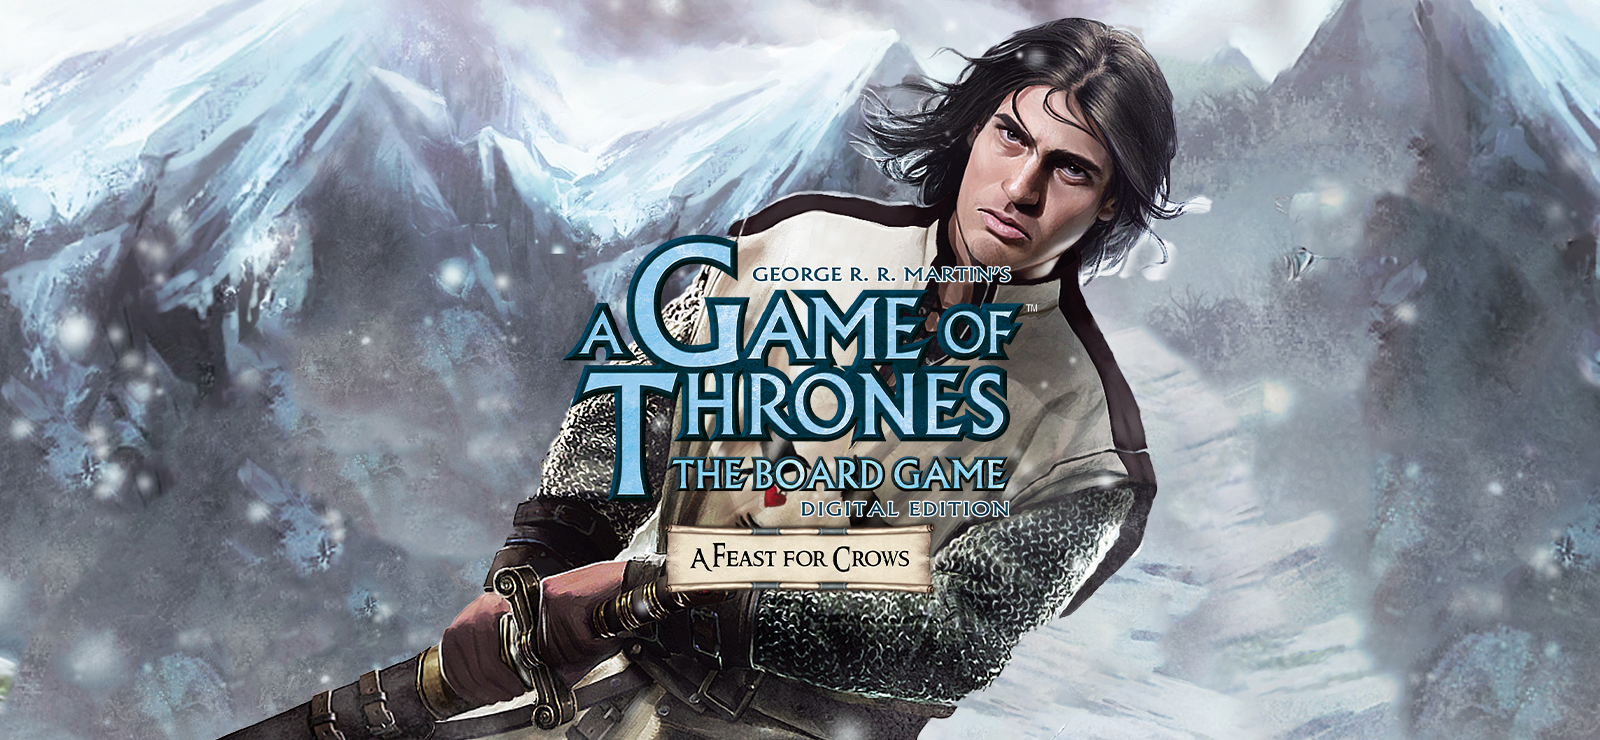 A Game Of Thrones - A Feast For Crows